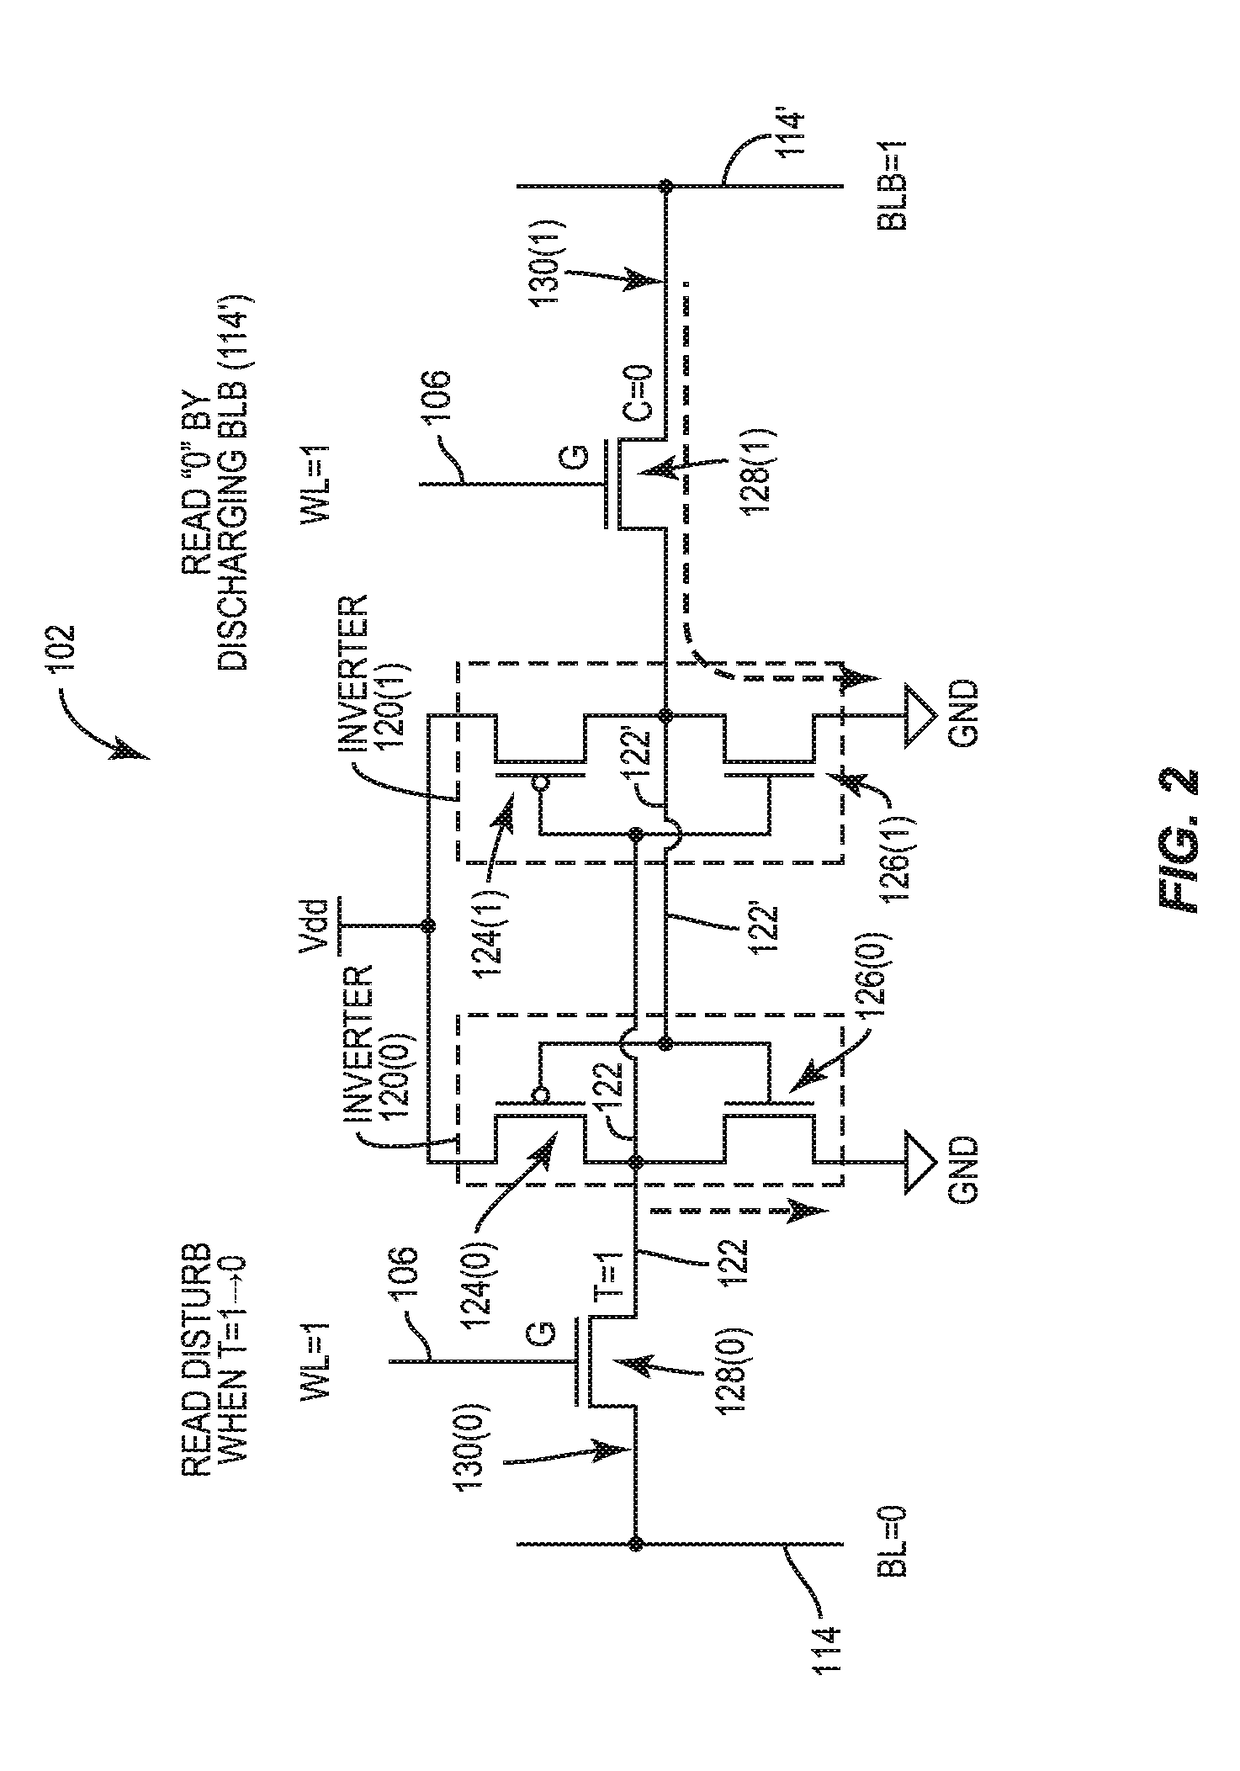 Wordline negative boost write-assist circuits for memory bit cells employing a P-type field-effect transistor (PFET) write port(s), and related systems and methods